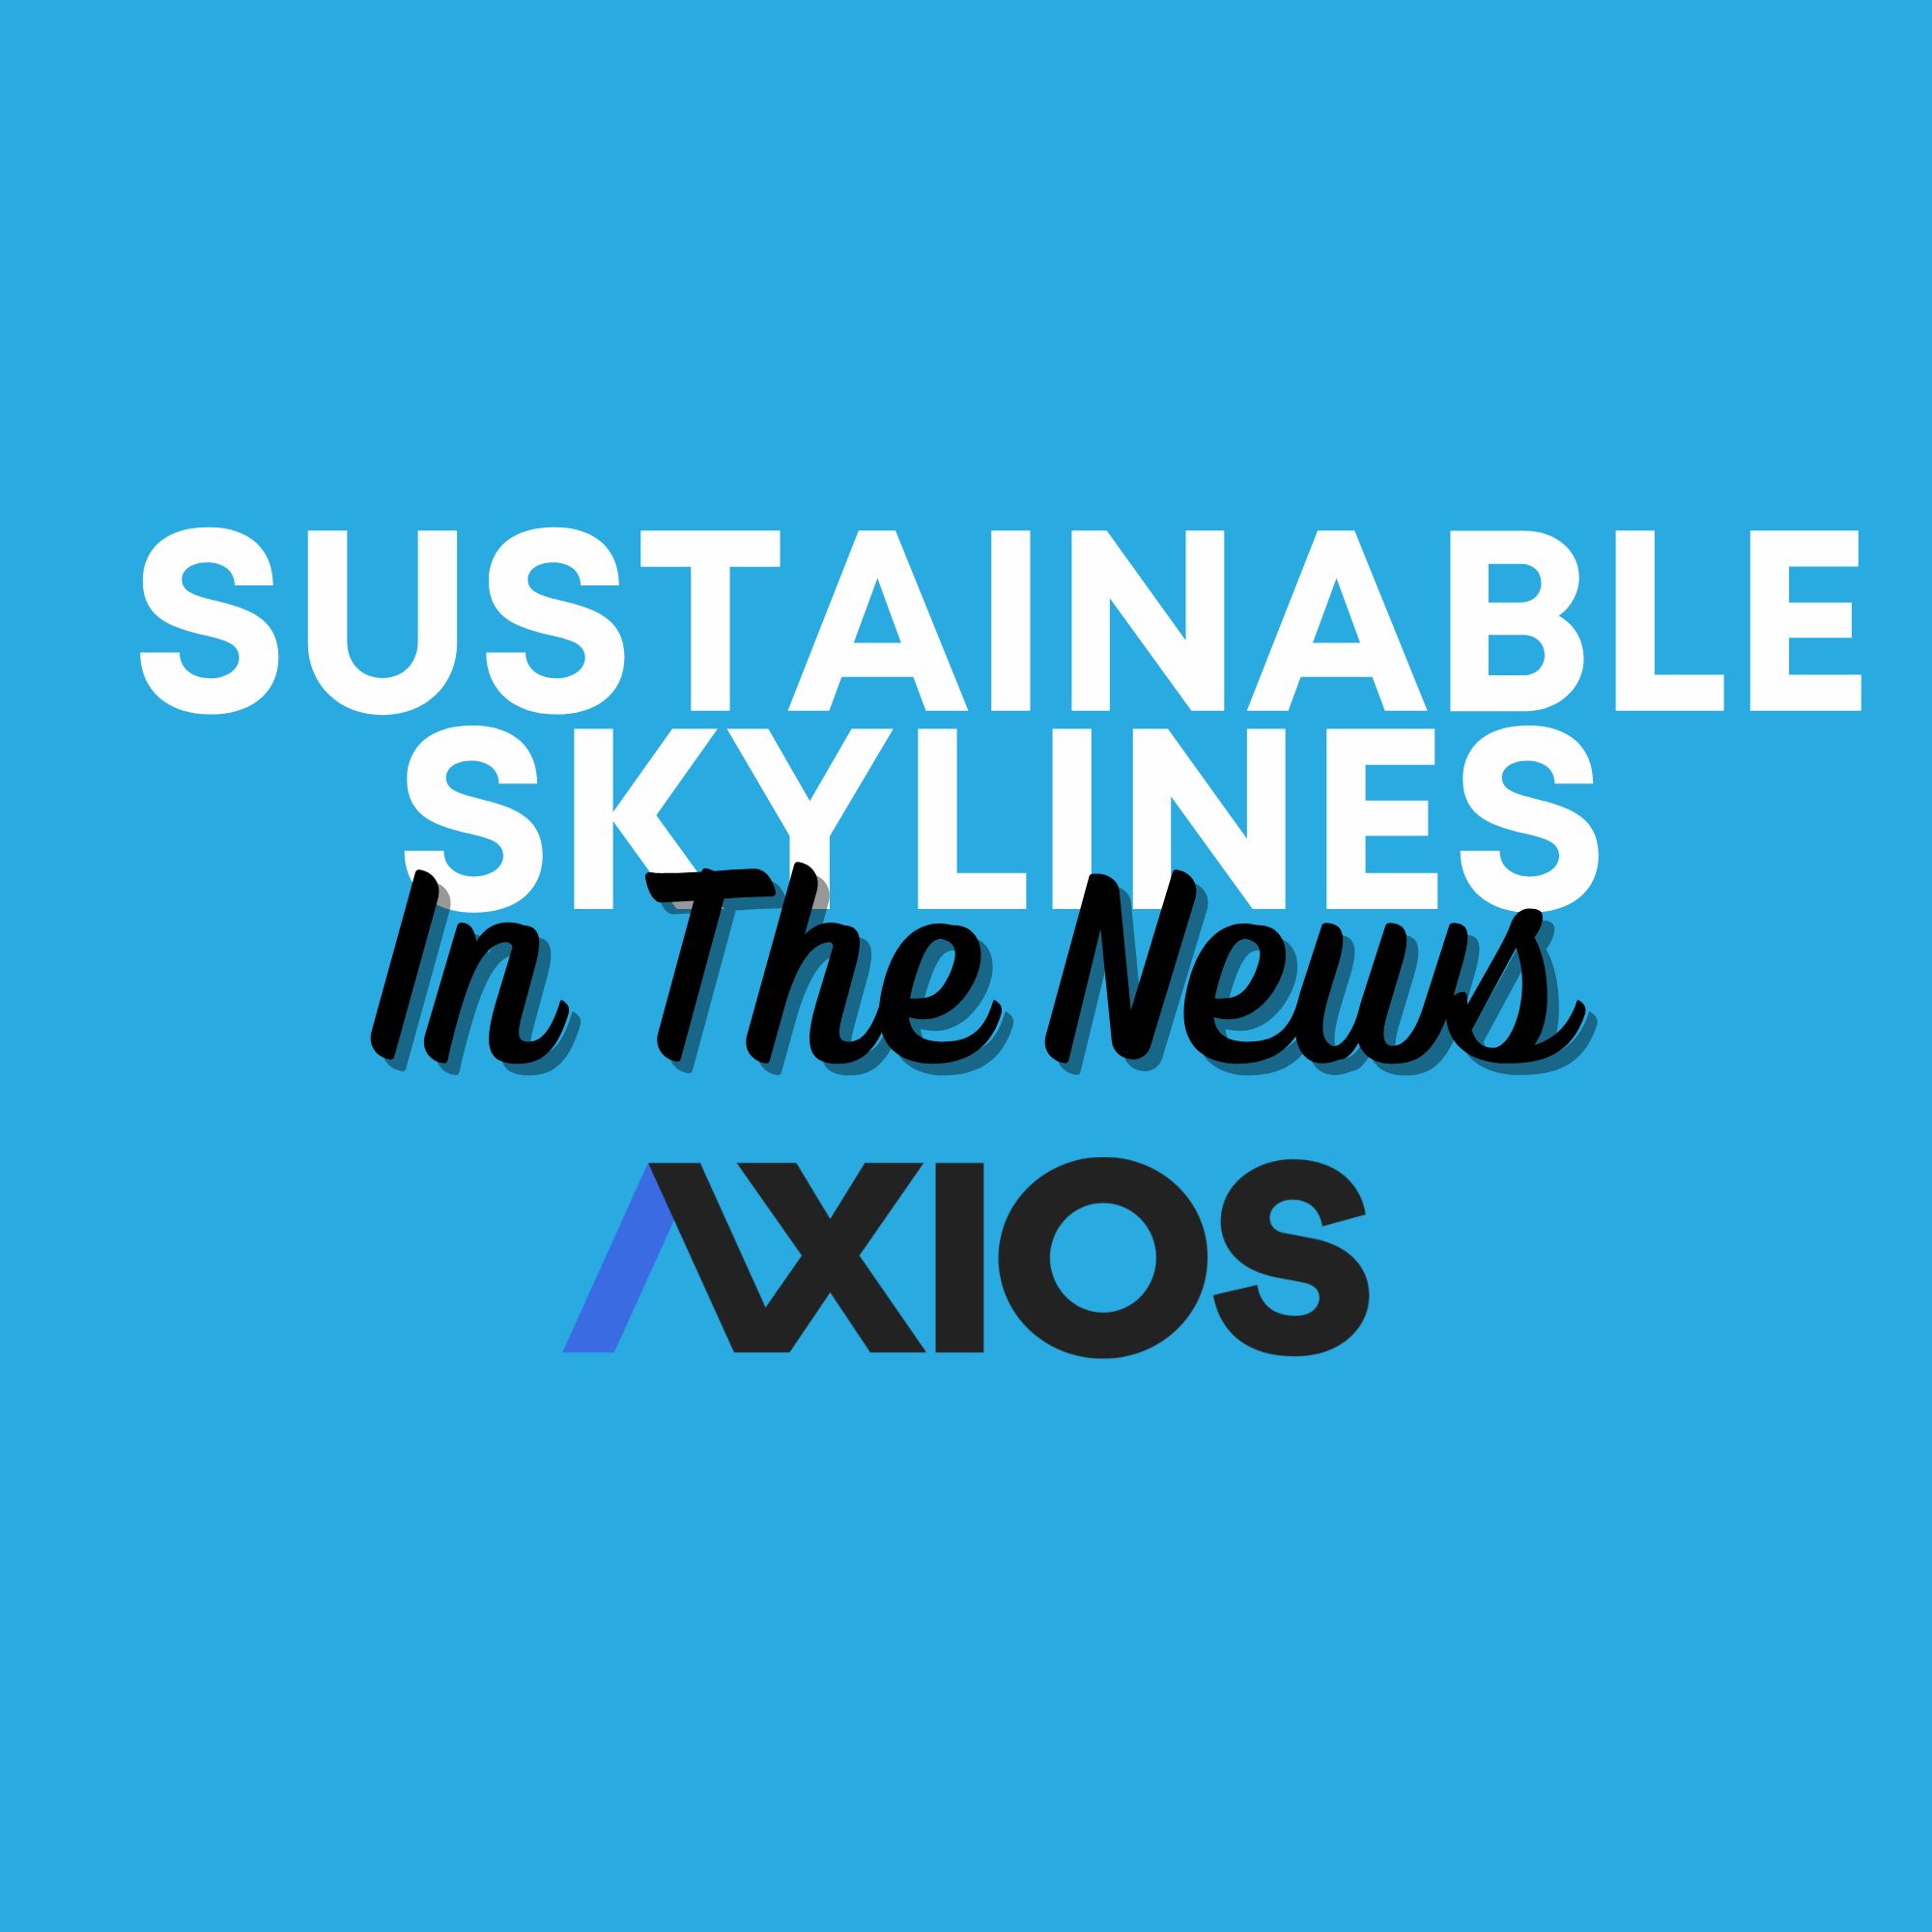 Sustainable Skylines In The News - Axios